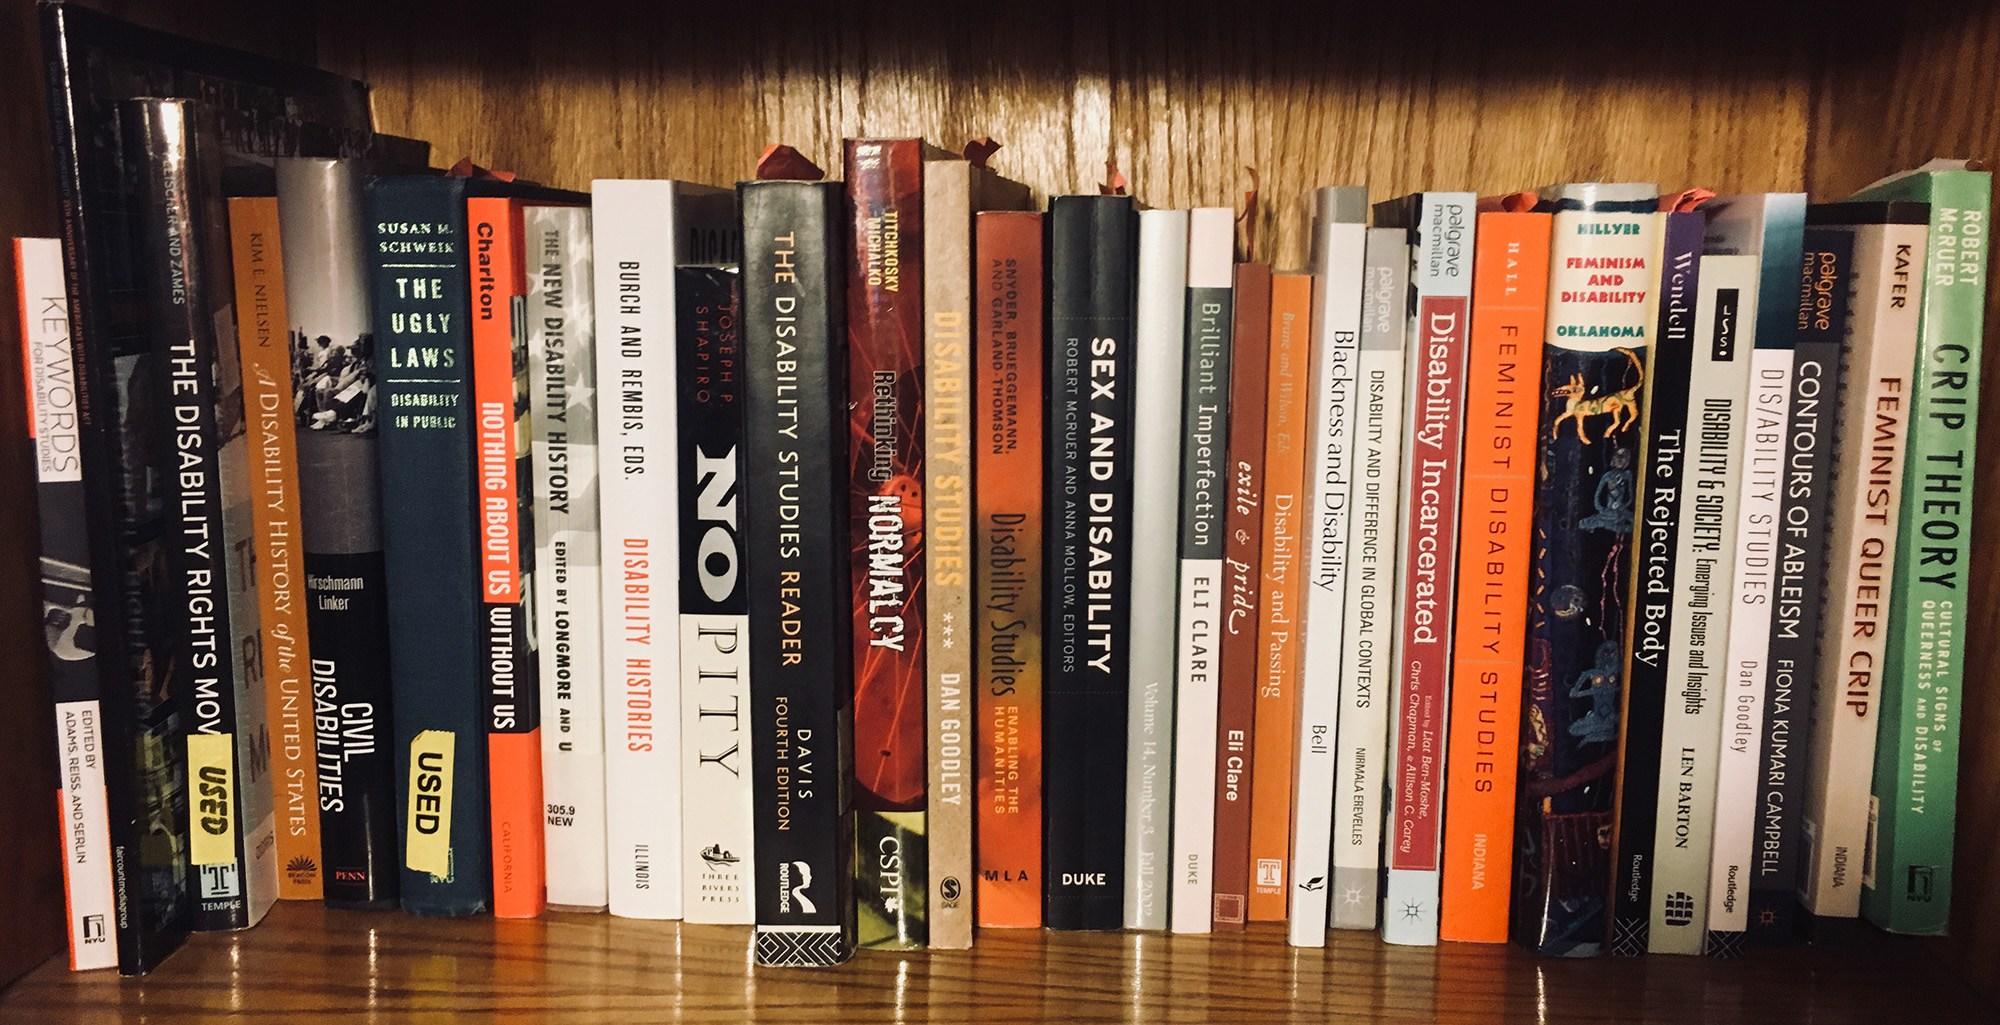 Bookshelf with books on critical disability studies